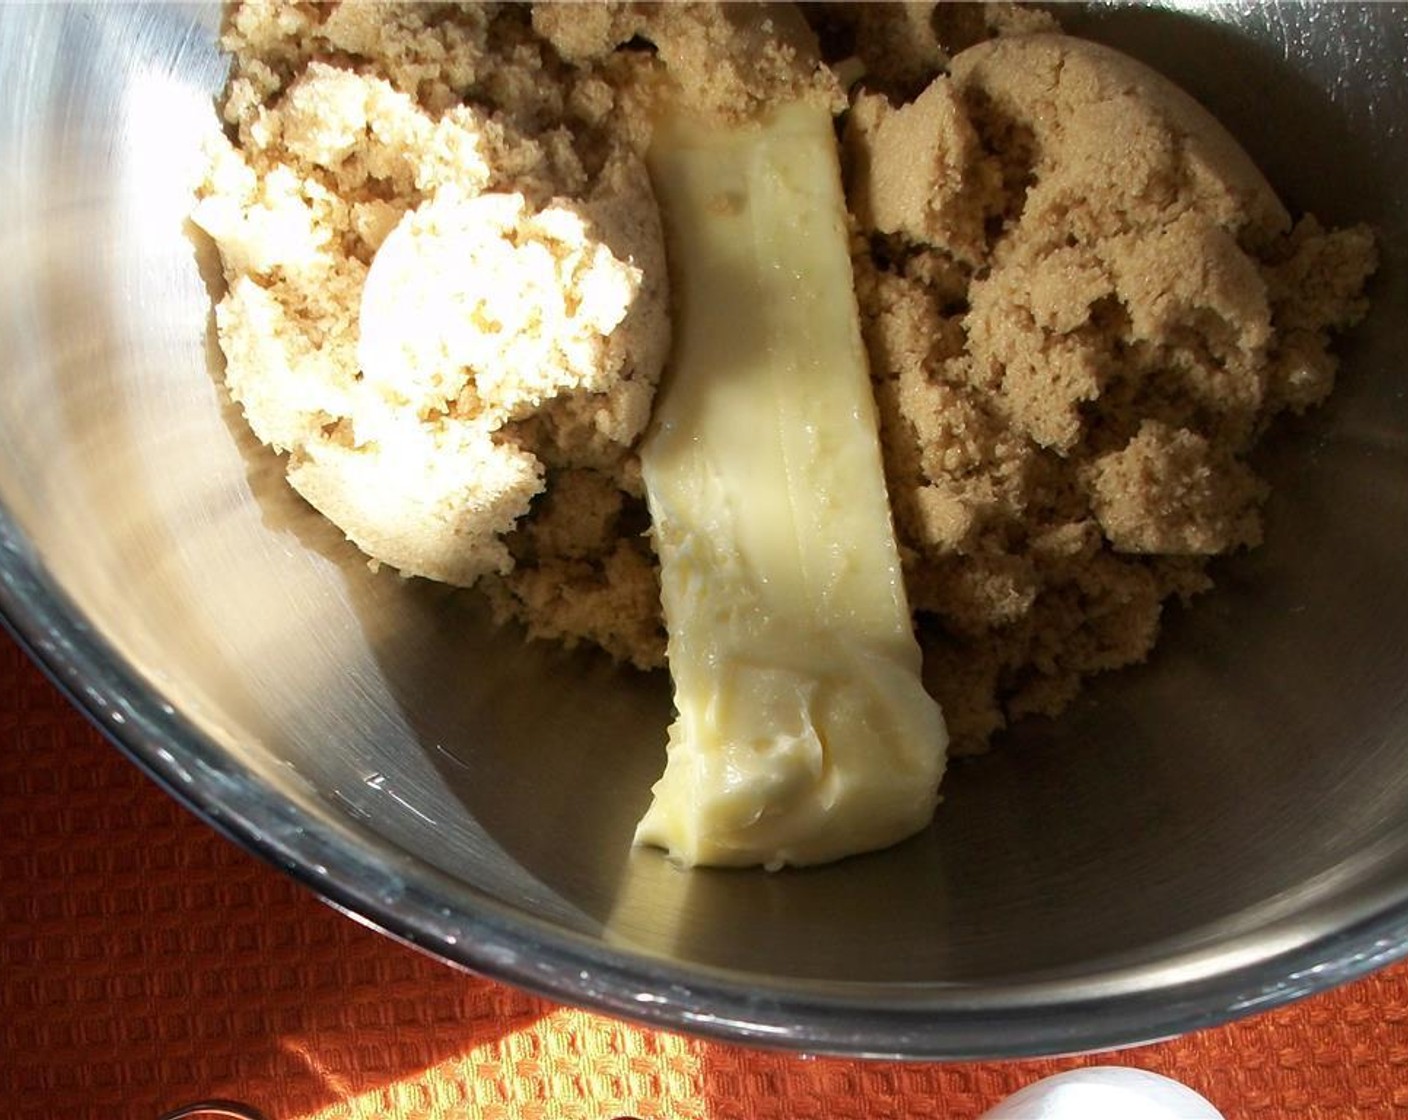 step 3 With an electric mixer, cream Unsalted Butter (1/2 cup) and Brown Sugar (1 cup). Add Egg (1), beat until combined. Add Blackstrap Molasses (1/4 cup), beat until combined, scraping down sides of the bowl.